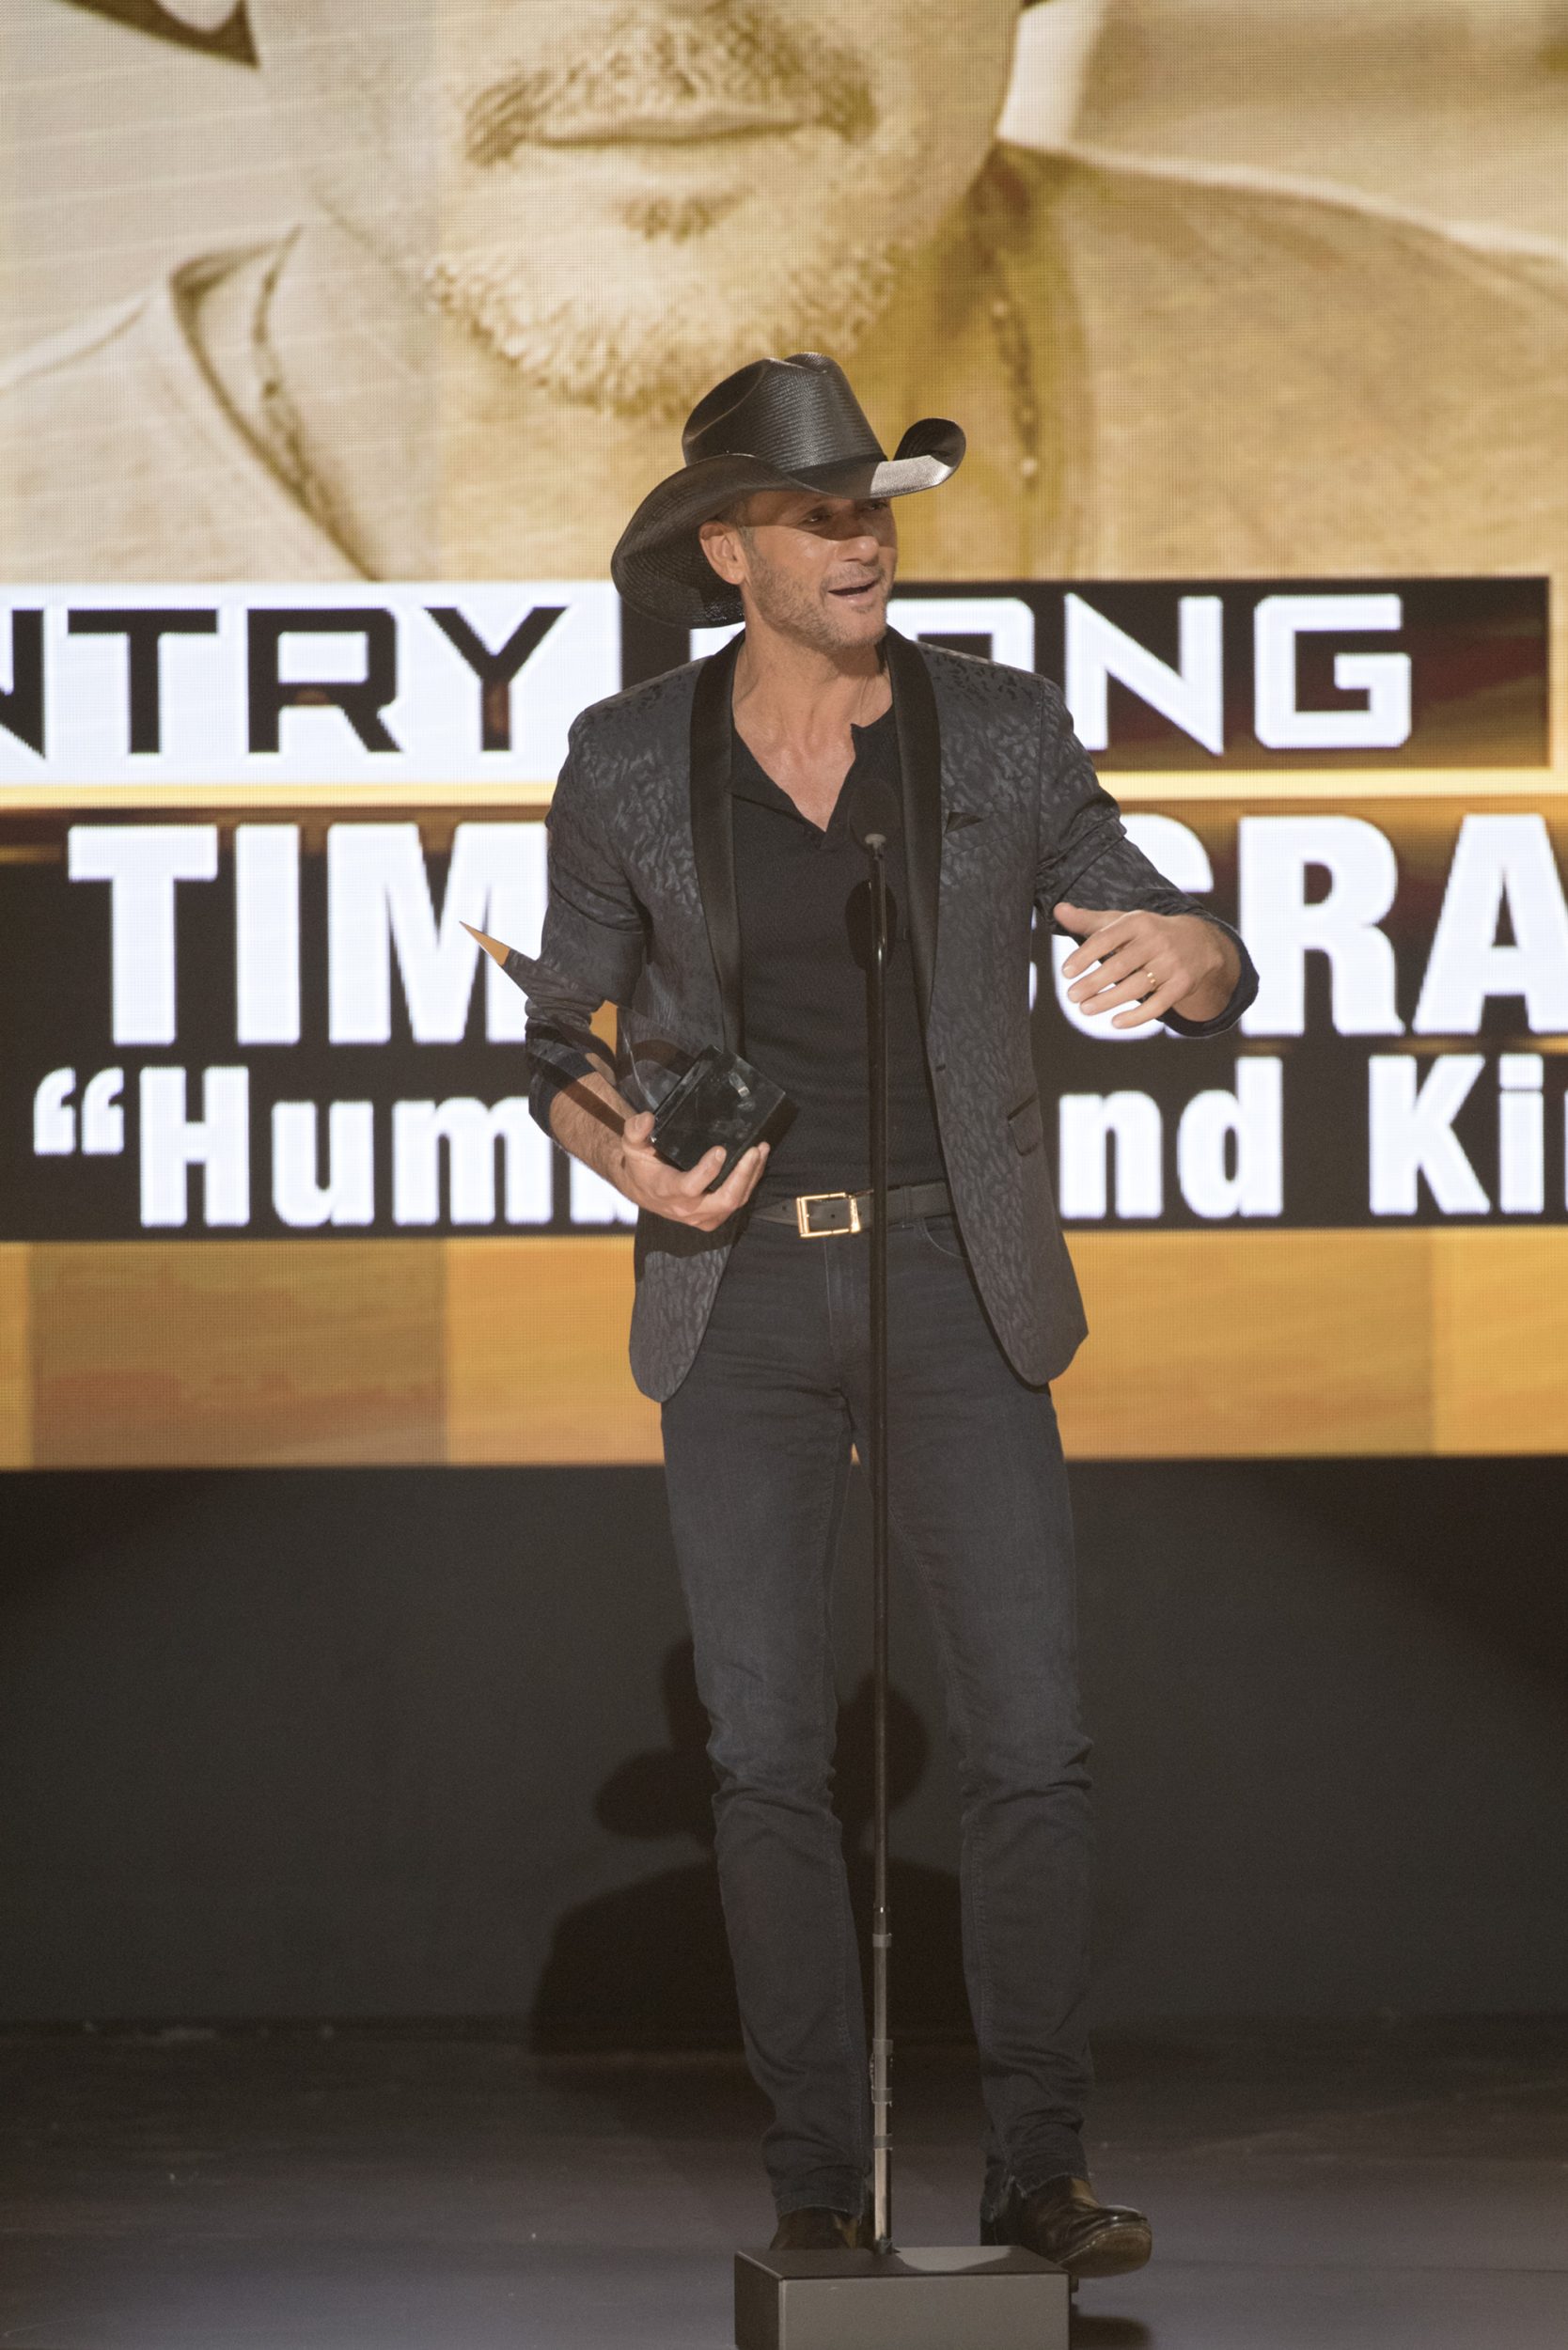 THE 2016 AMERICAN MUSIC AWARDS(r) - The “2016 American Music Awards,” the world’s biggest fan-voted award show, broadcasts live from the Microsoft Theater in Los Angeles on SUNDAY, NOVEMBER 20, at 8:00 p.m. EST, on ABC. (Image Group LA/ABC) TIM MCGRAW